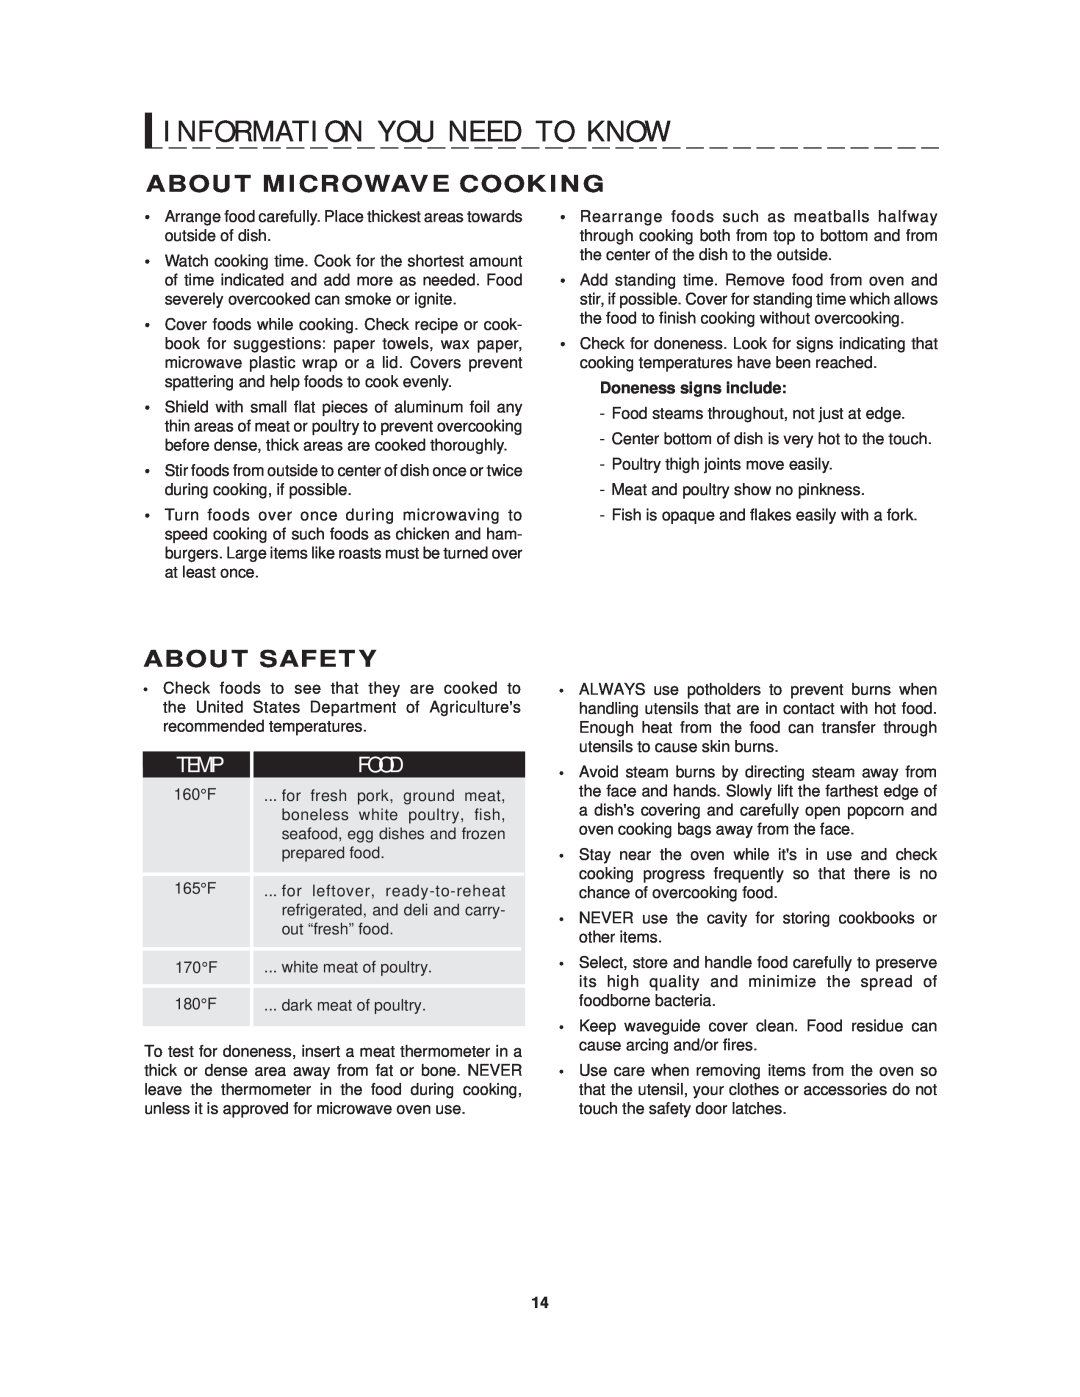 Sharp R-1214 About Microwave Cooking, About Safety, T E M P, F O O D, I N F O R M A T I O N Y O U N E E D T O K N O W 